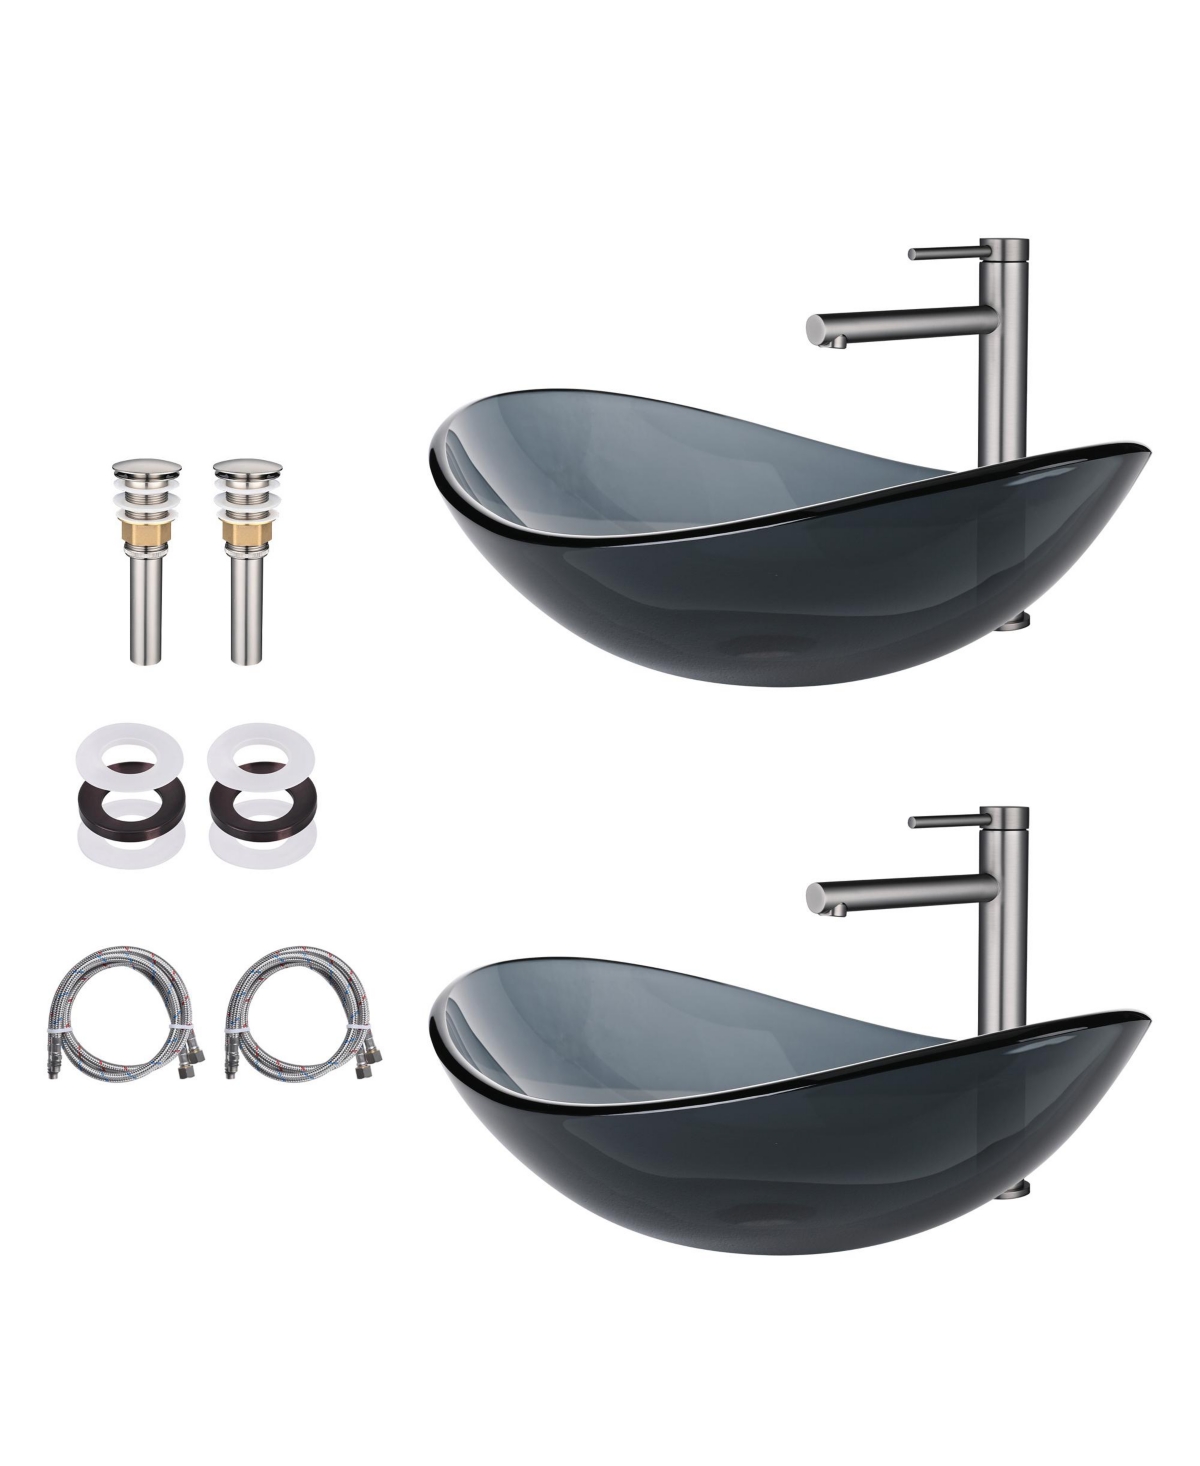 Oval Tempered Glass Vessel Sink w/ Bathroom Faucet Drain Set of 2 - Charcoal